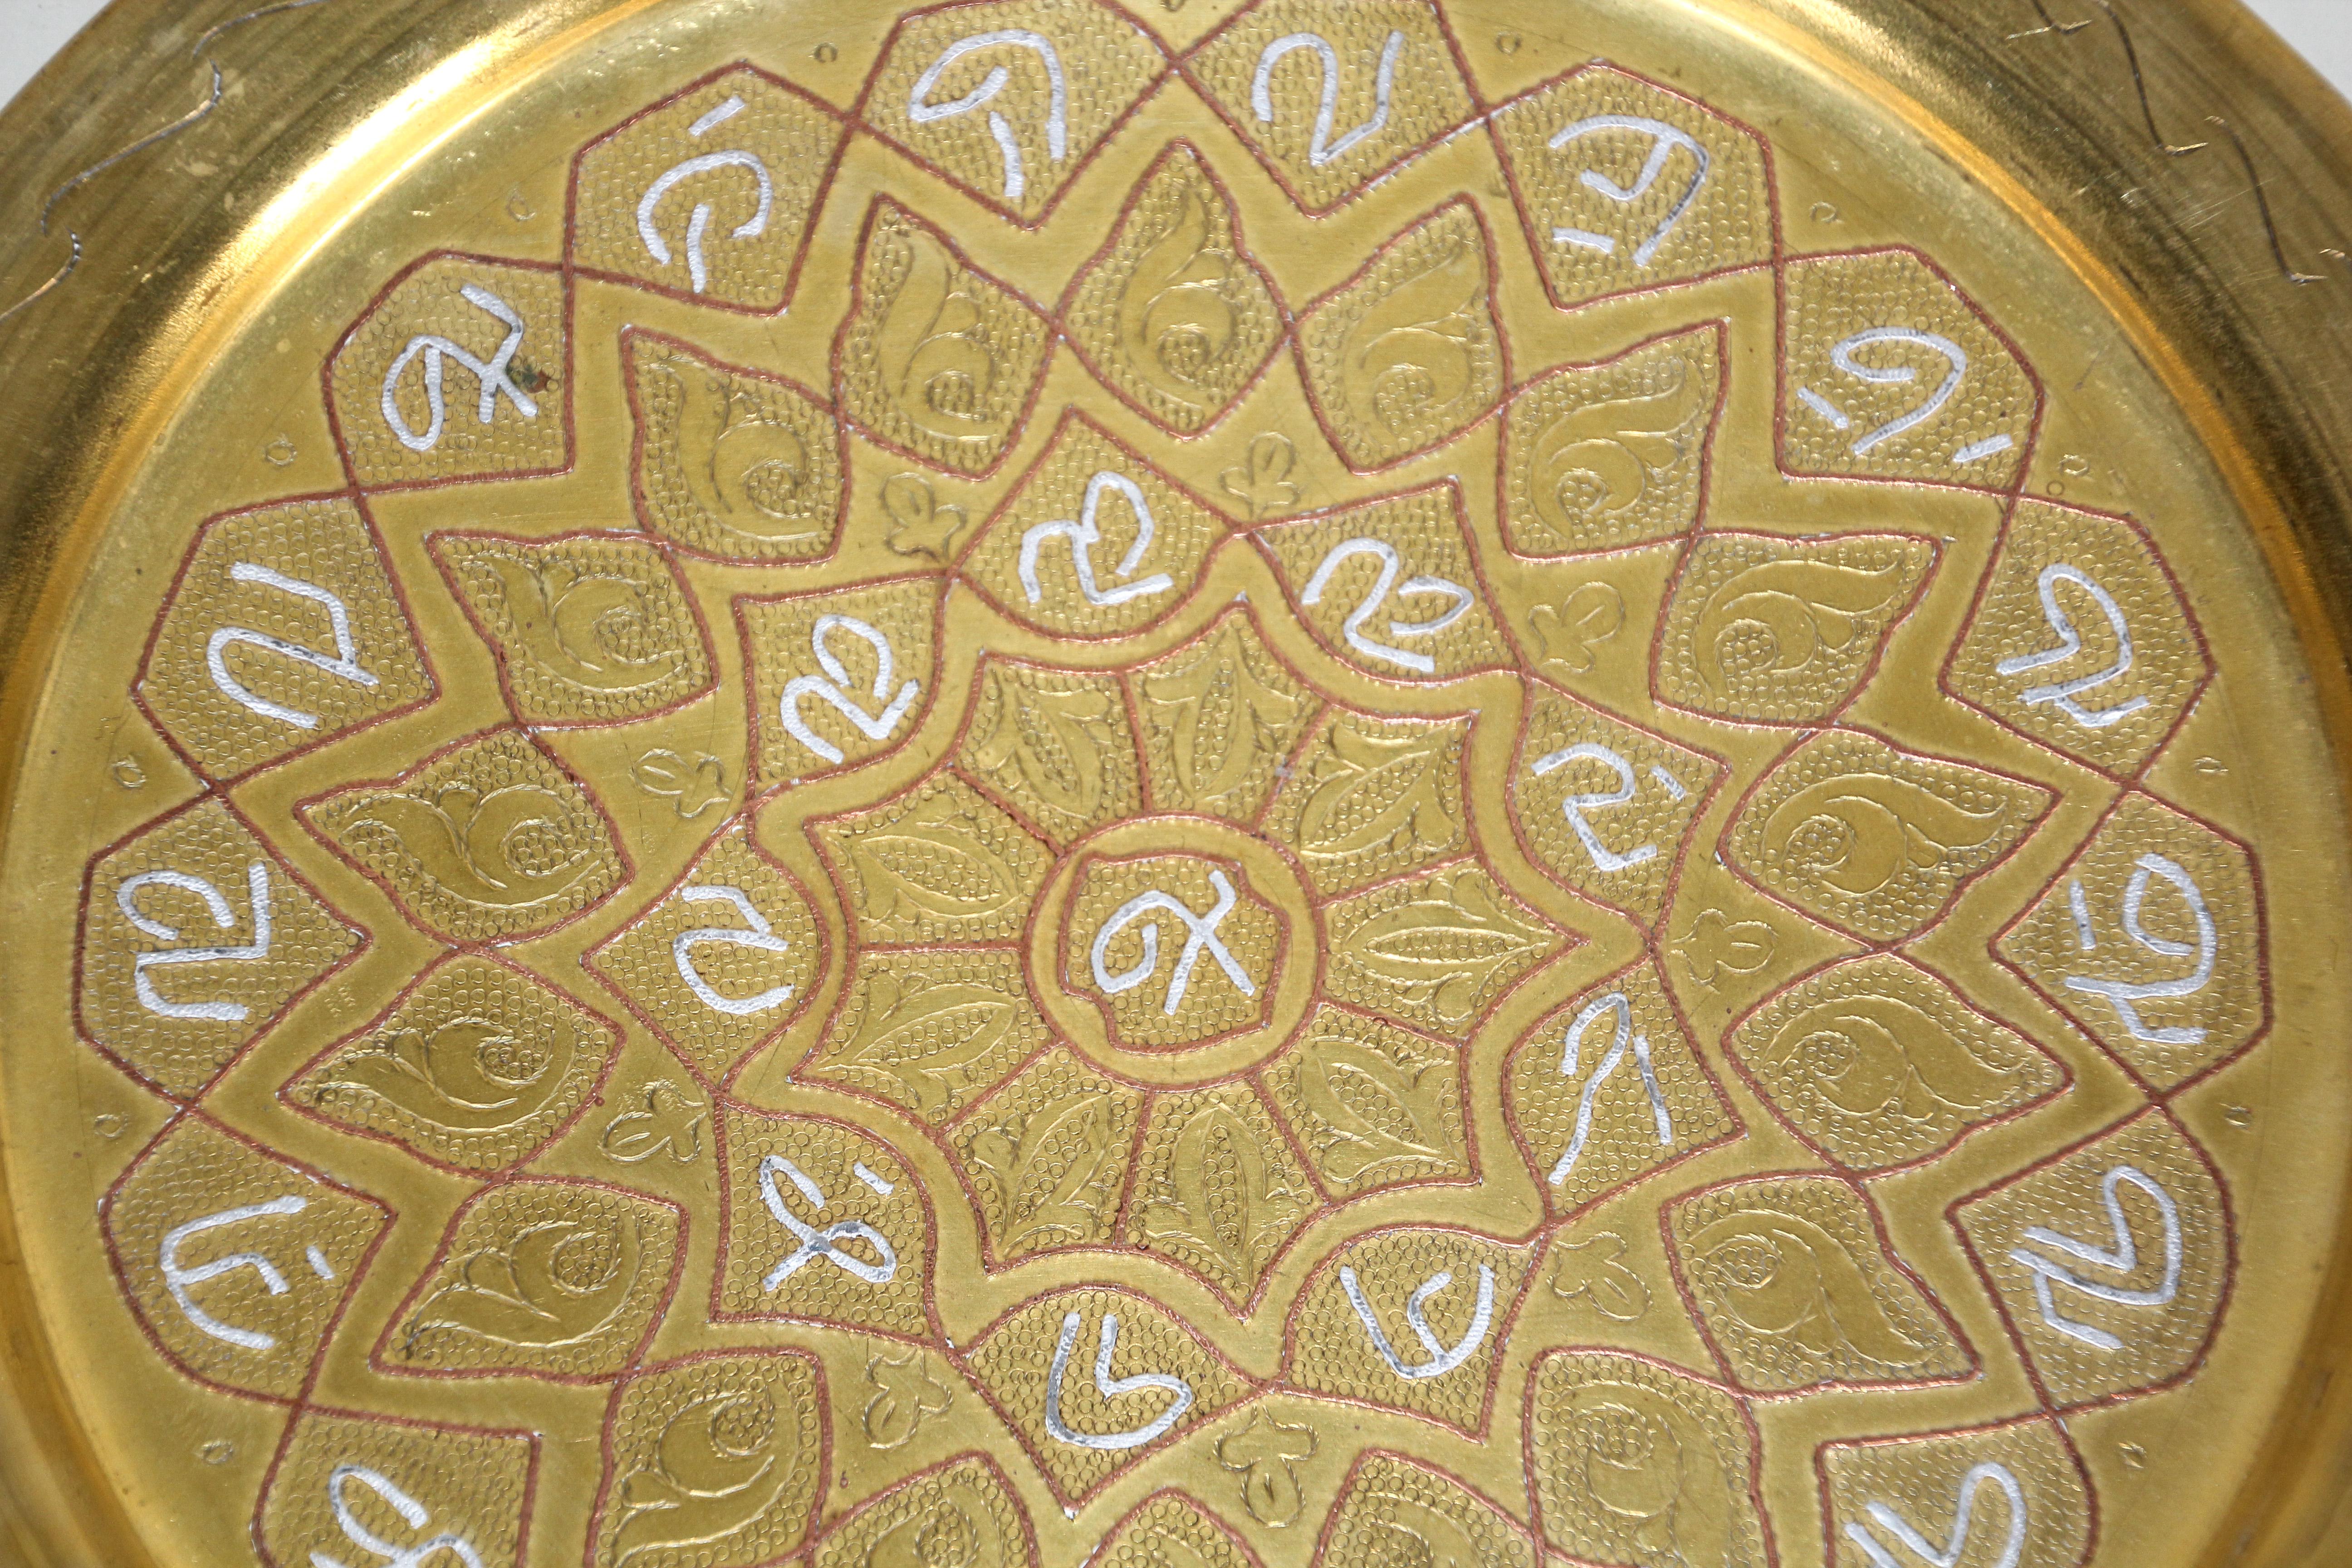 Islamic Arabic calligraphy circular tray with silver overlay.
Round Egyptian brass tray overlaid with metal silver and copper Islamic calligraphy writing and foliates patterns.
This Middle Eastern Egyptian collector metal brass tray is first